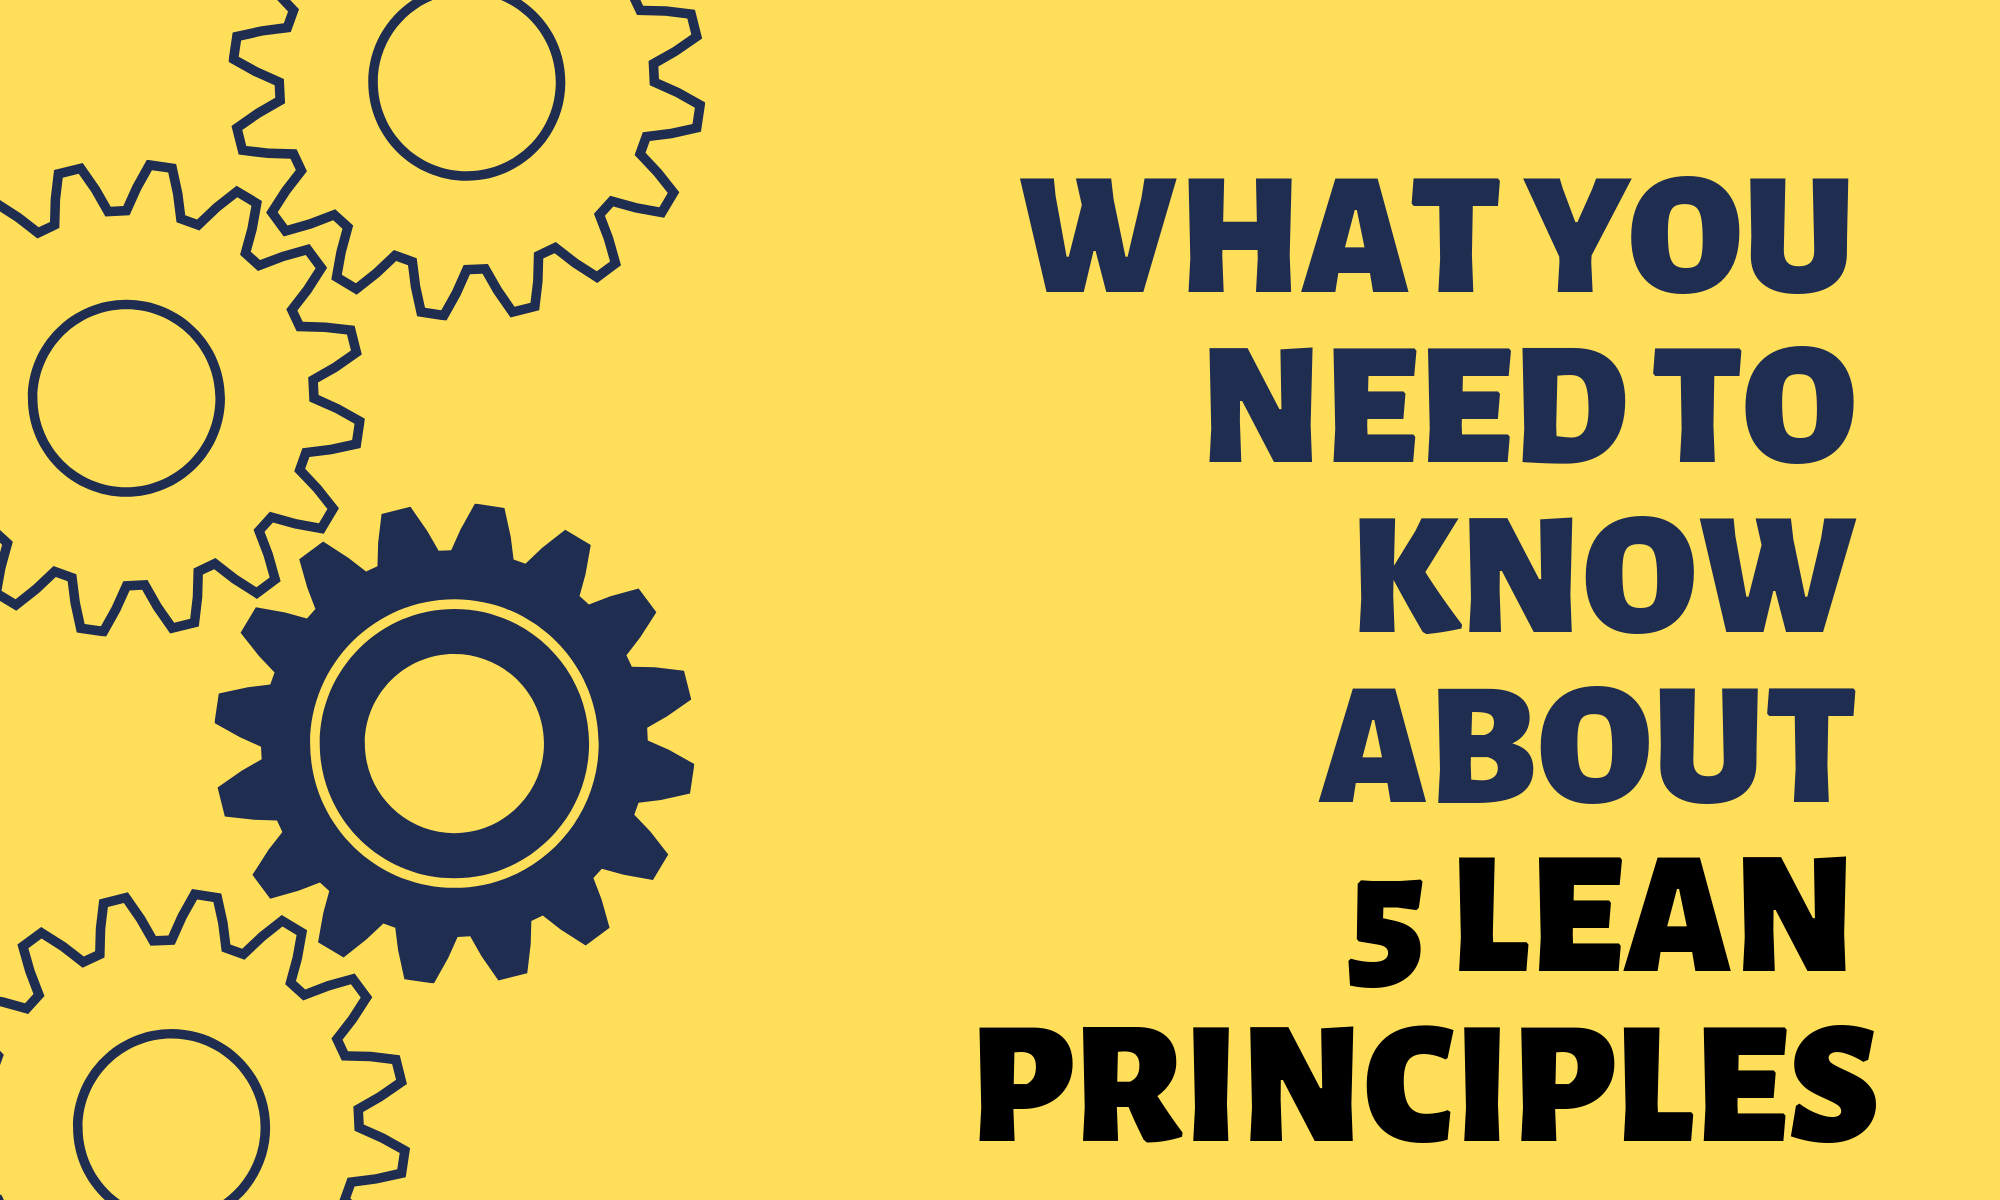 You are currently viewing What are the 5 lean principles?